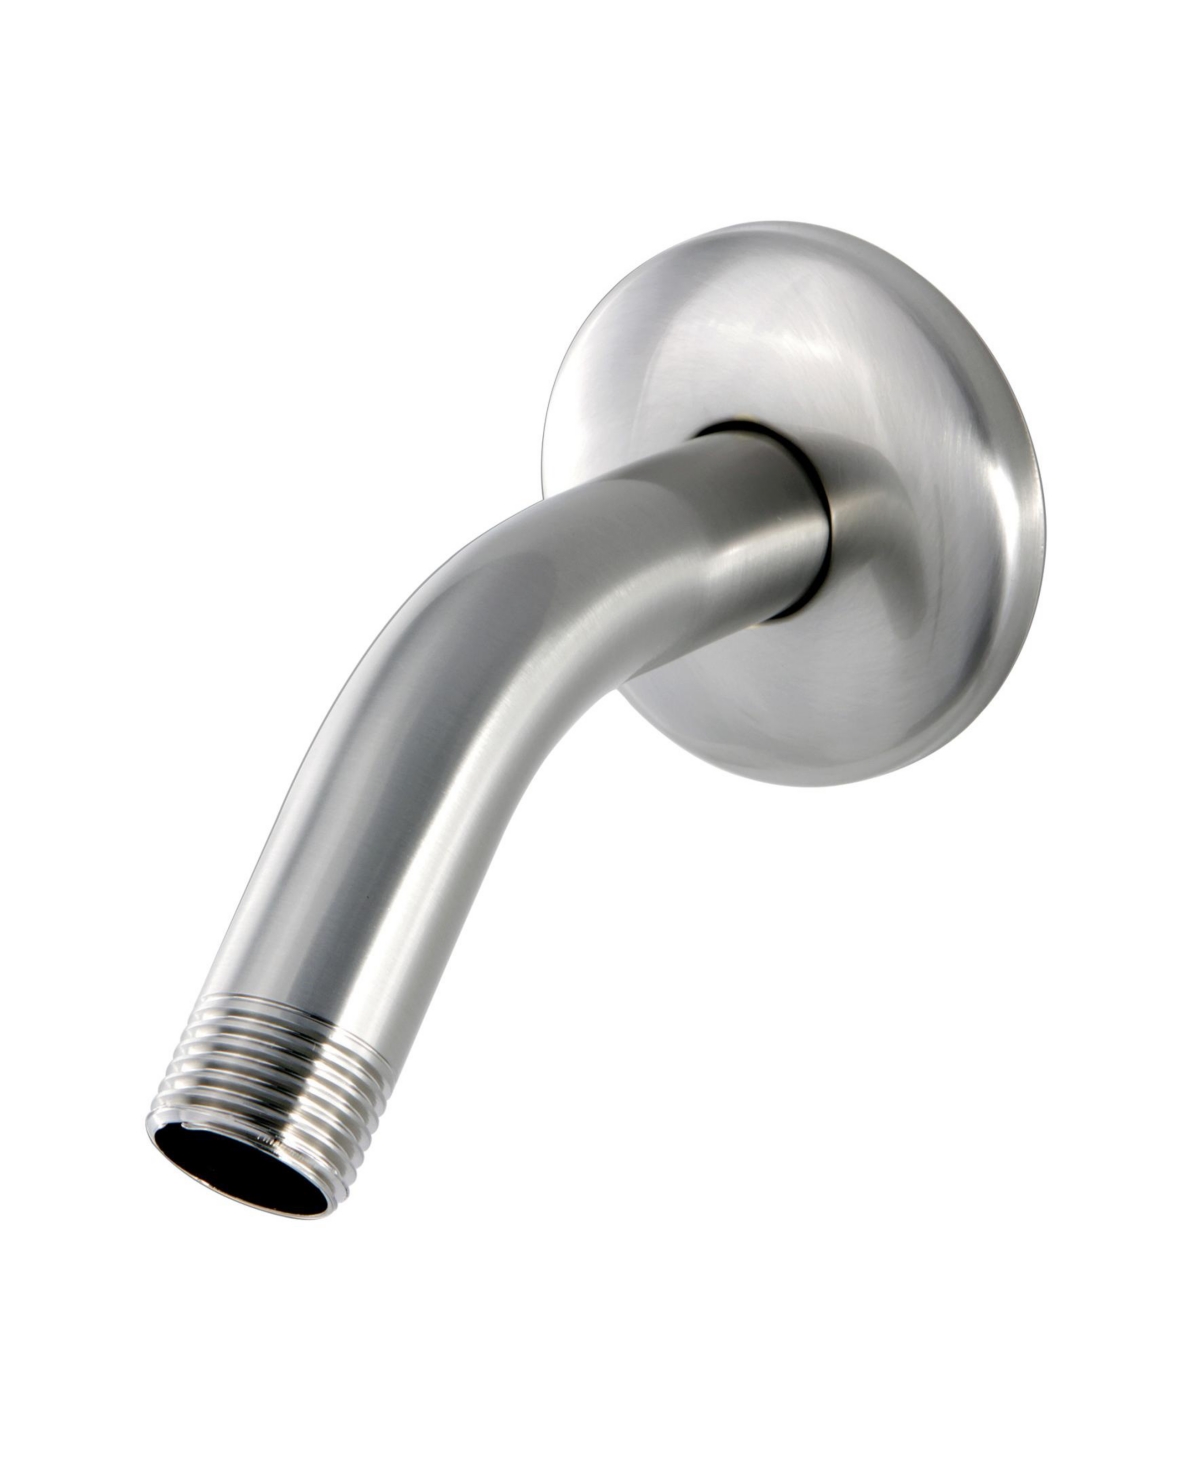 Kingston Brass 6-Inch Shower Arm with Flange Bedding